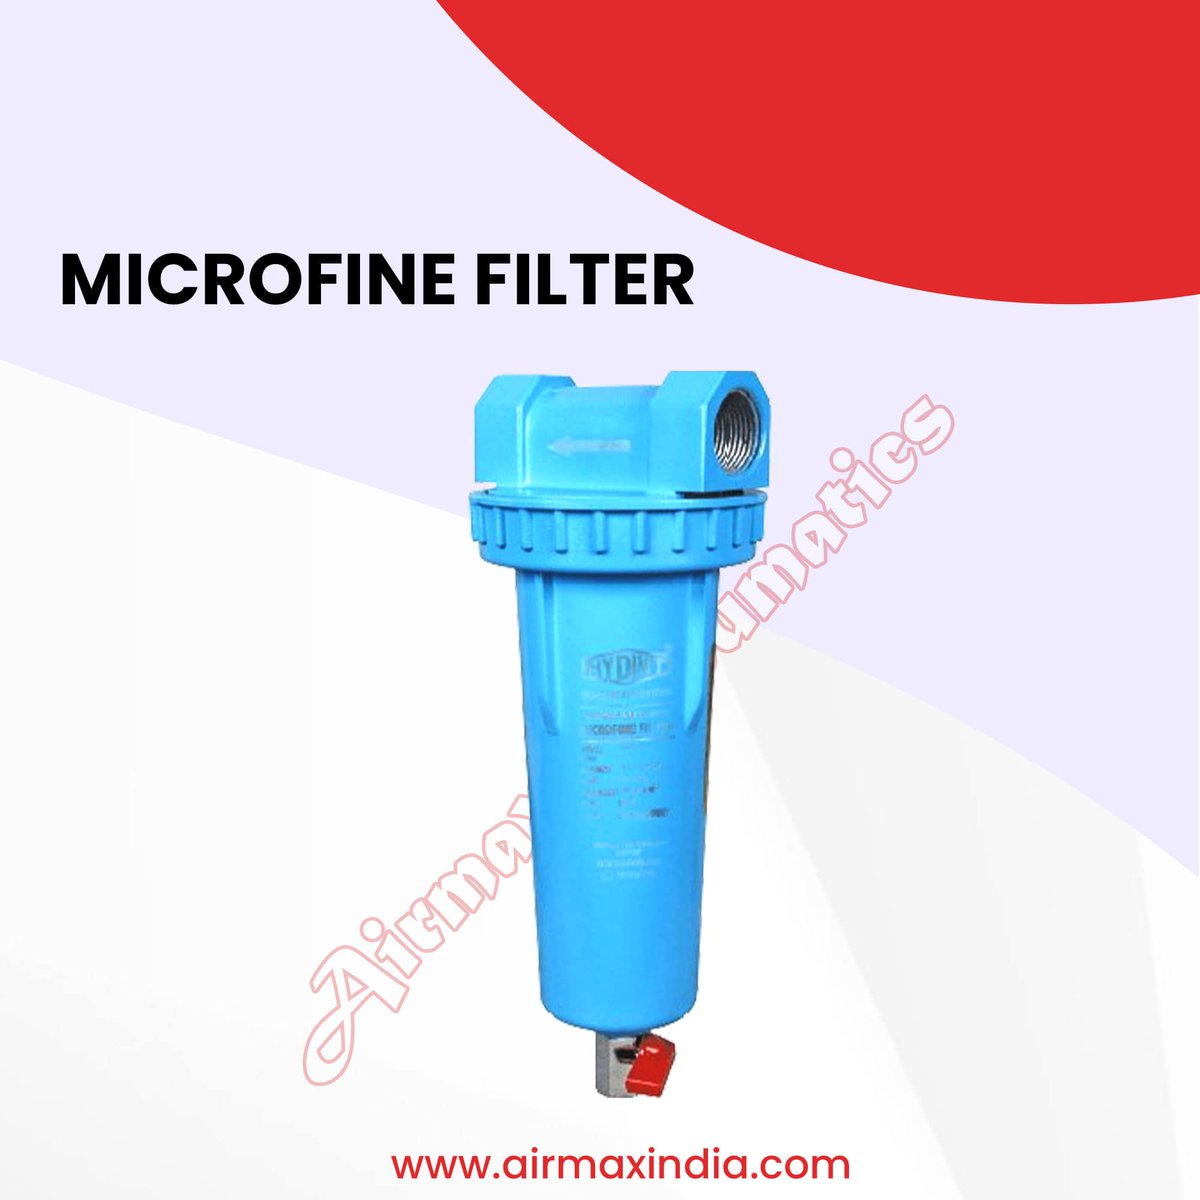 Upgrade your machinery performance with our Microfine Filter, Model: HPF5, proudly made by Airmax Pneumatic. The best quality and performance, ensuring your processes run smooth.

#airmaxpneumatics #Manufacturer #Exporter #Technology #MakeInIndia #G20 #India #Viral #trending